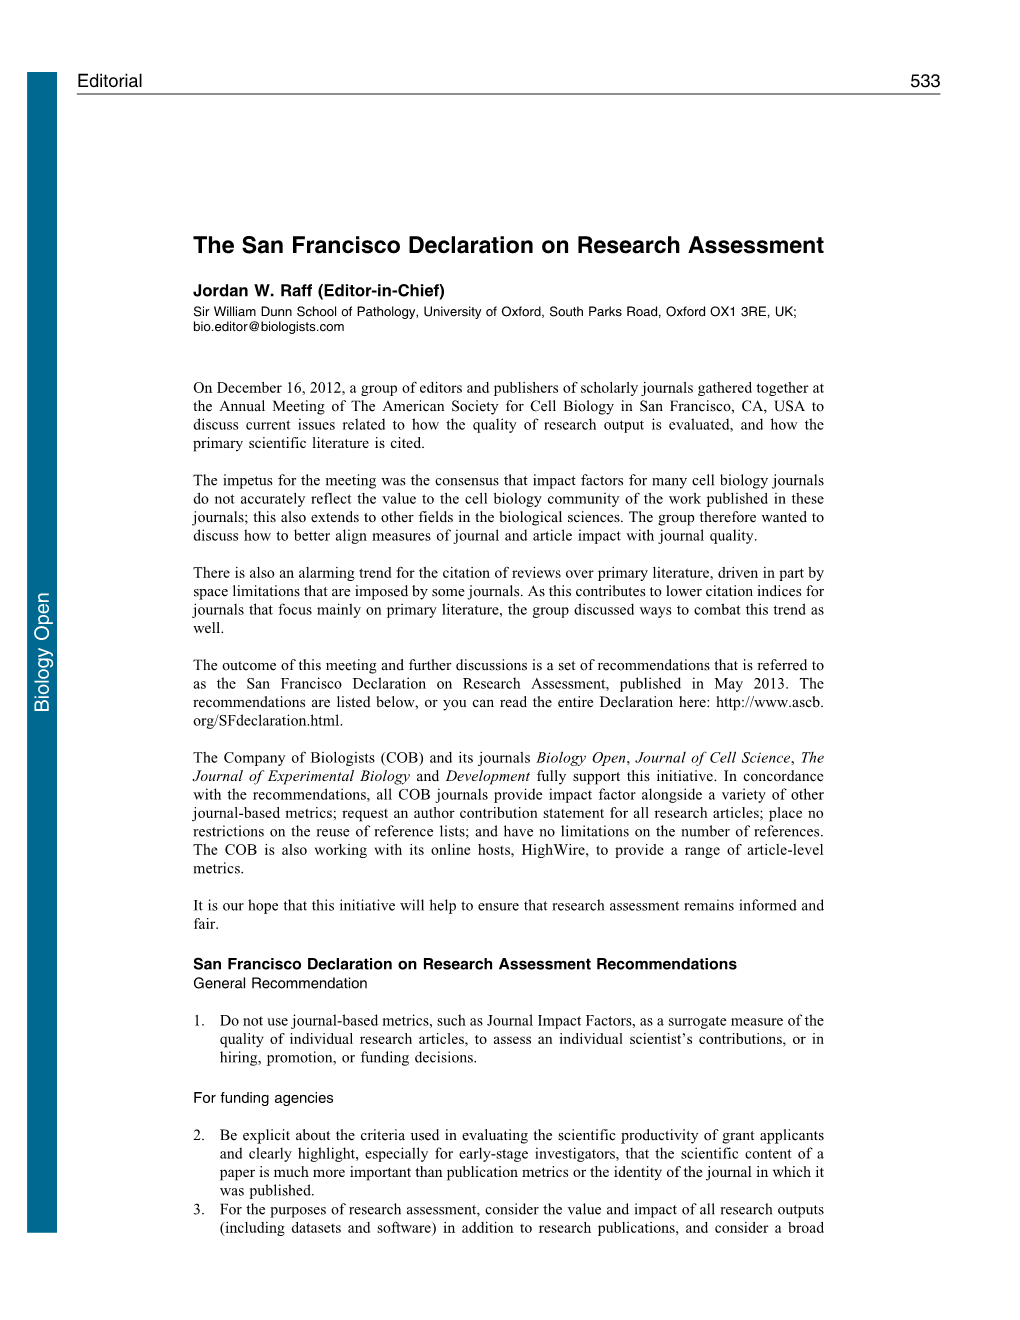 The San Francisco Declaration on Research Assessment